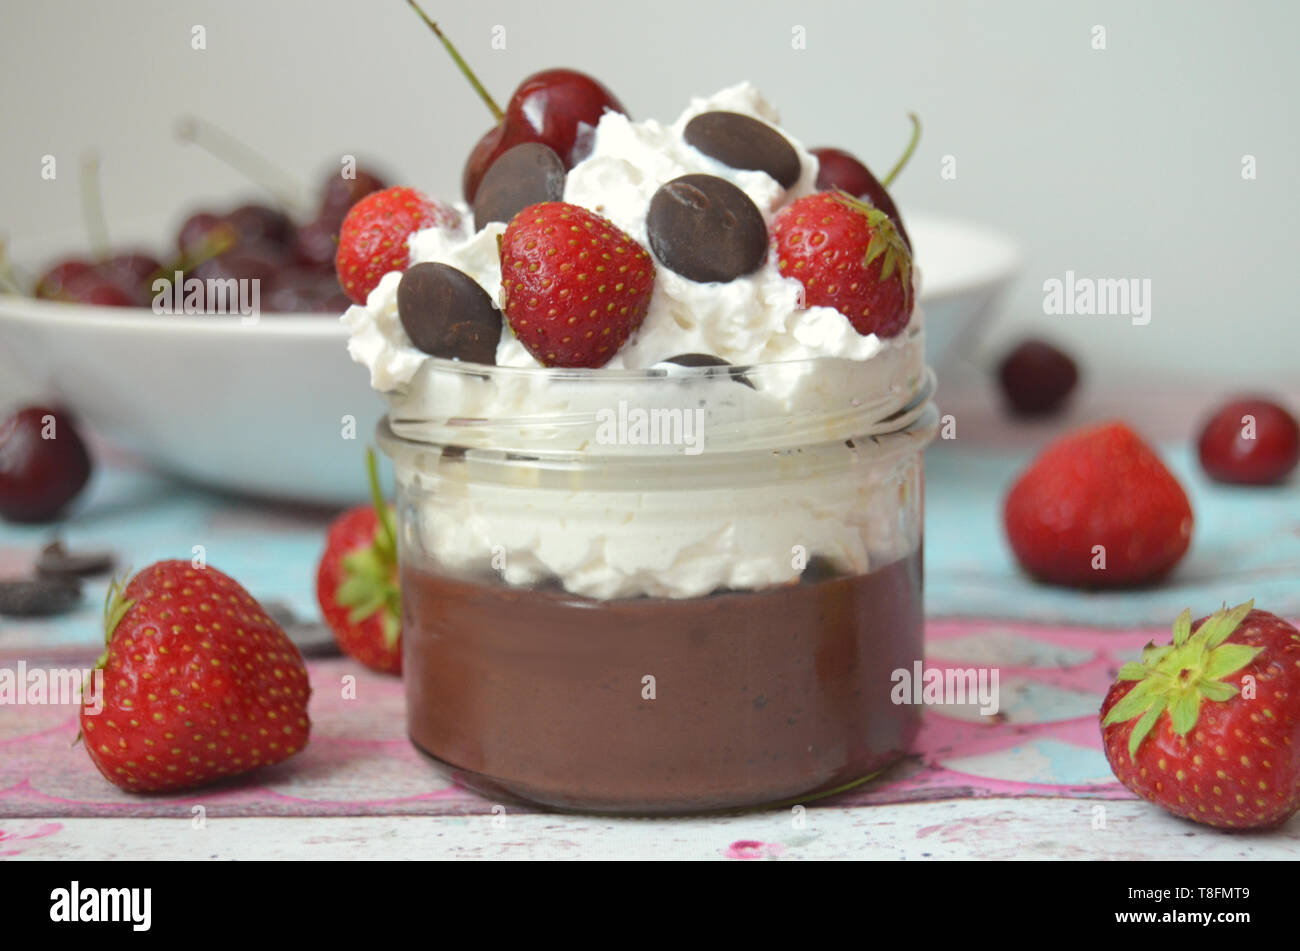 Dairy free chocolate pudding in a jar with whipped coconut cream, topped with strawberies and dark chocolate chips Stock Photo